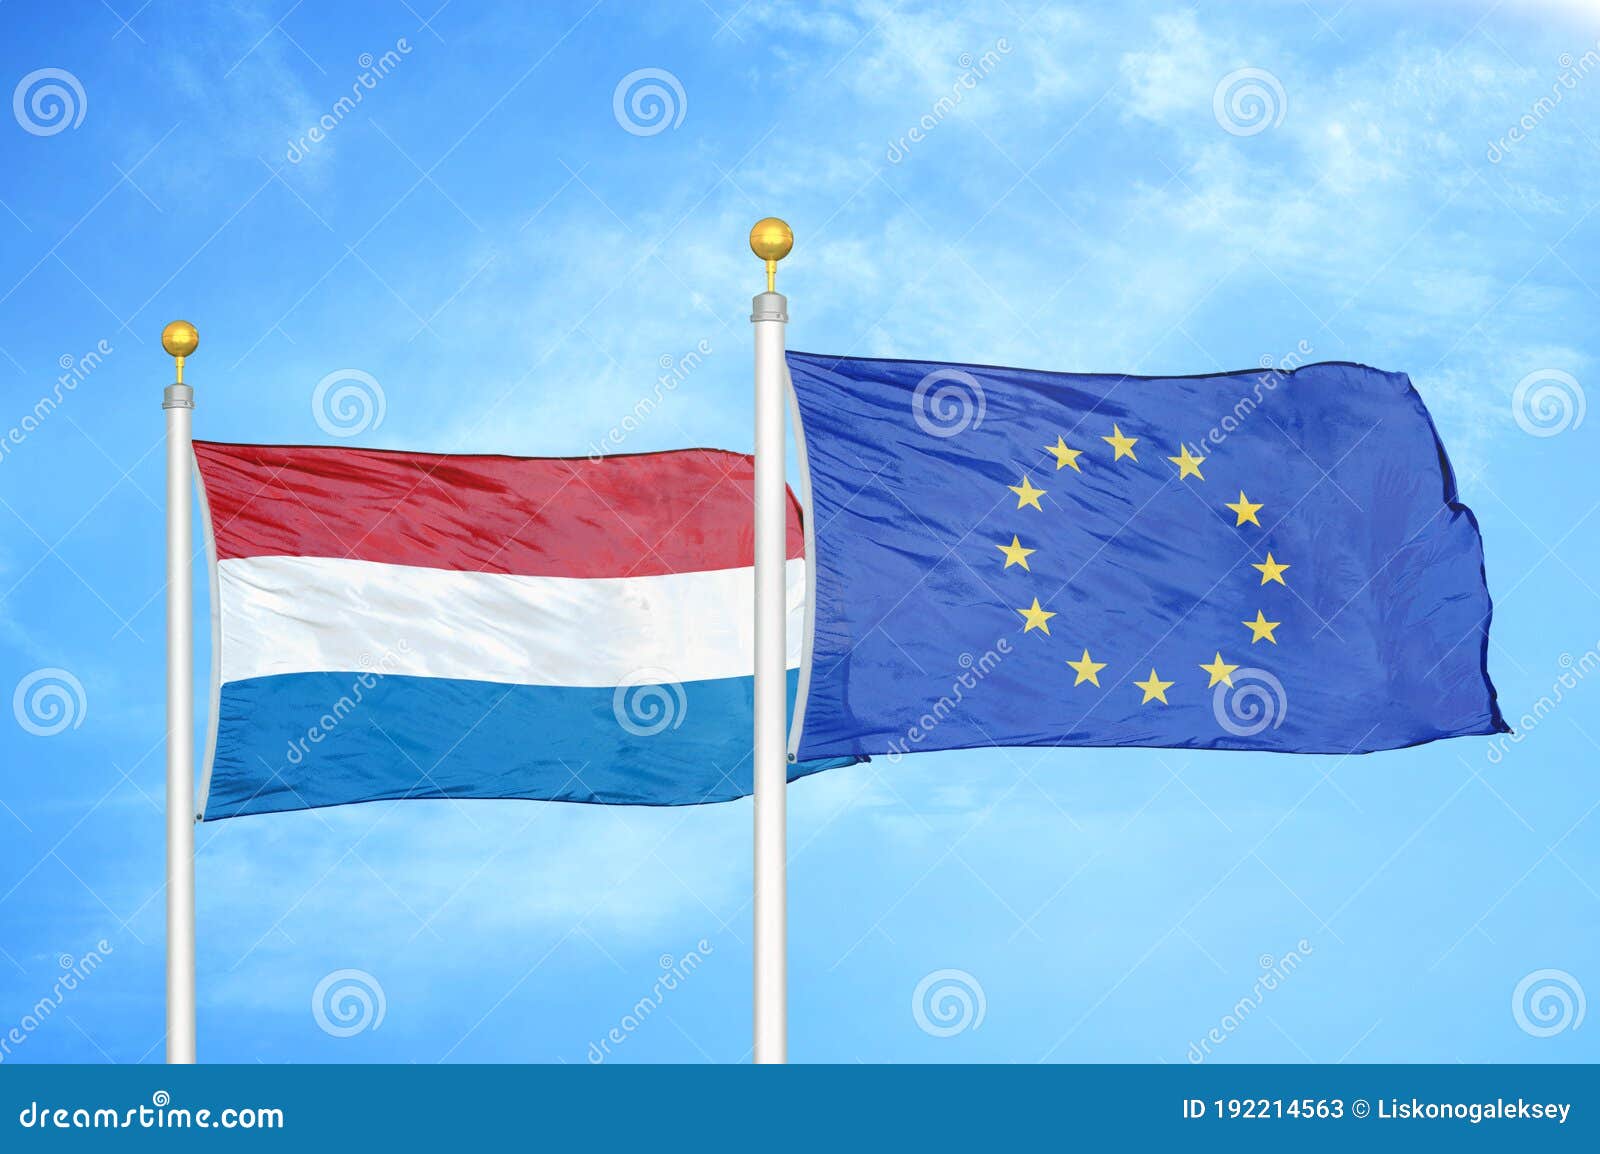 Netherlands and European Union Two Flags on Flagpoles and Blue Sky ...